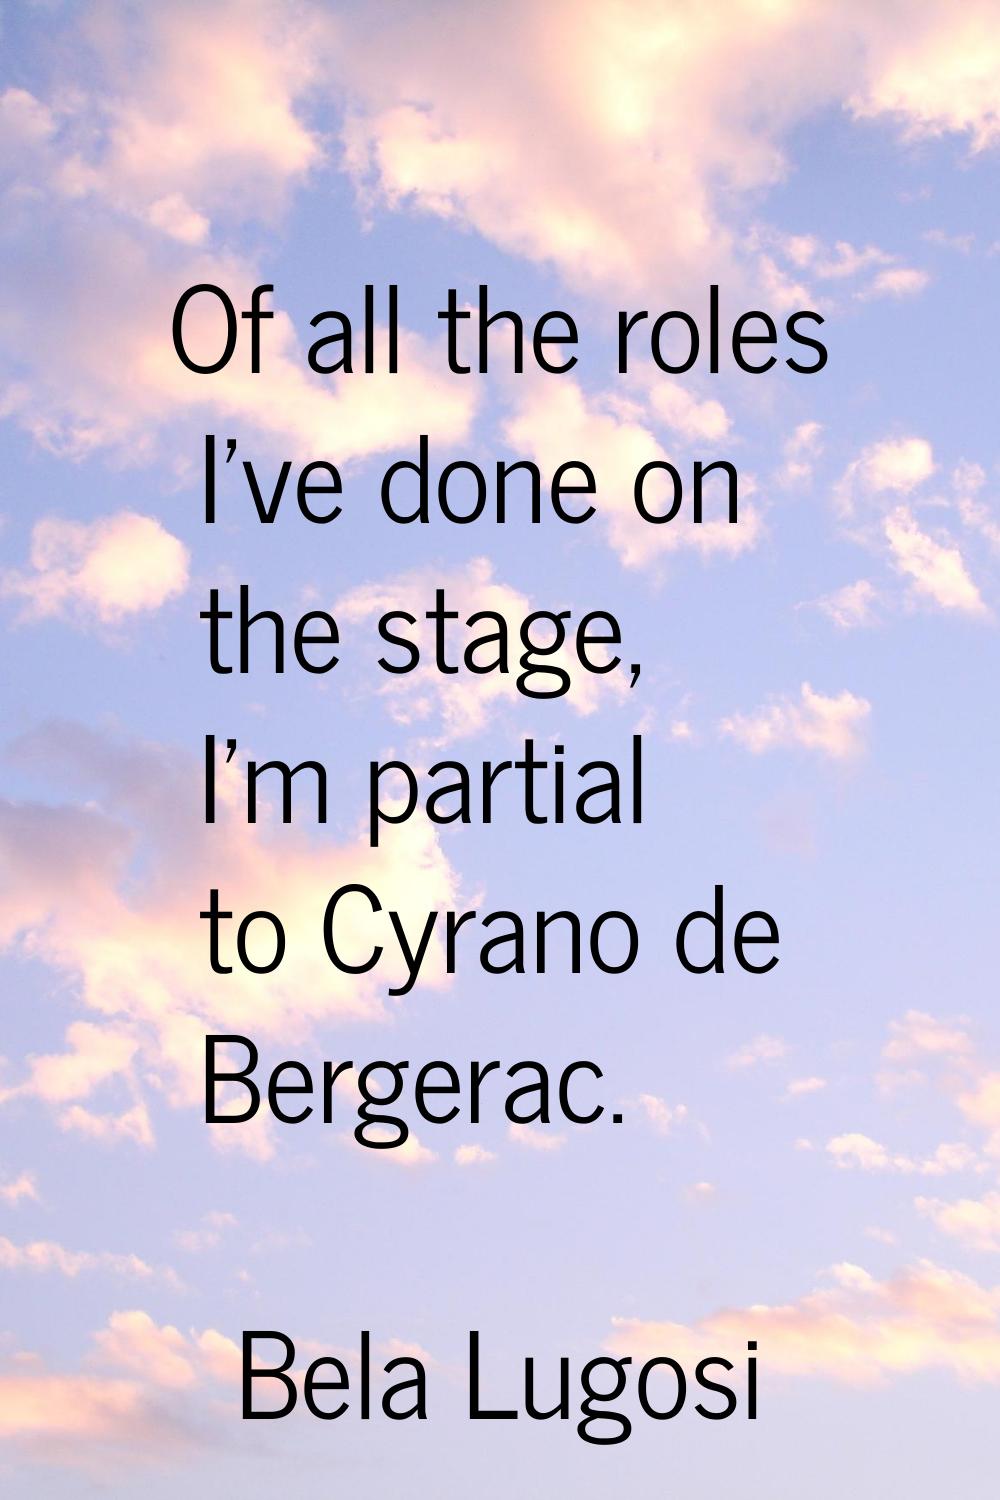 Of all the roles I've done on the stage, I'm partial to Cyrano de Bergerac.